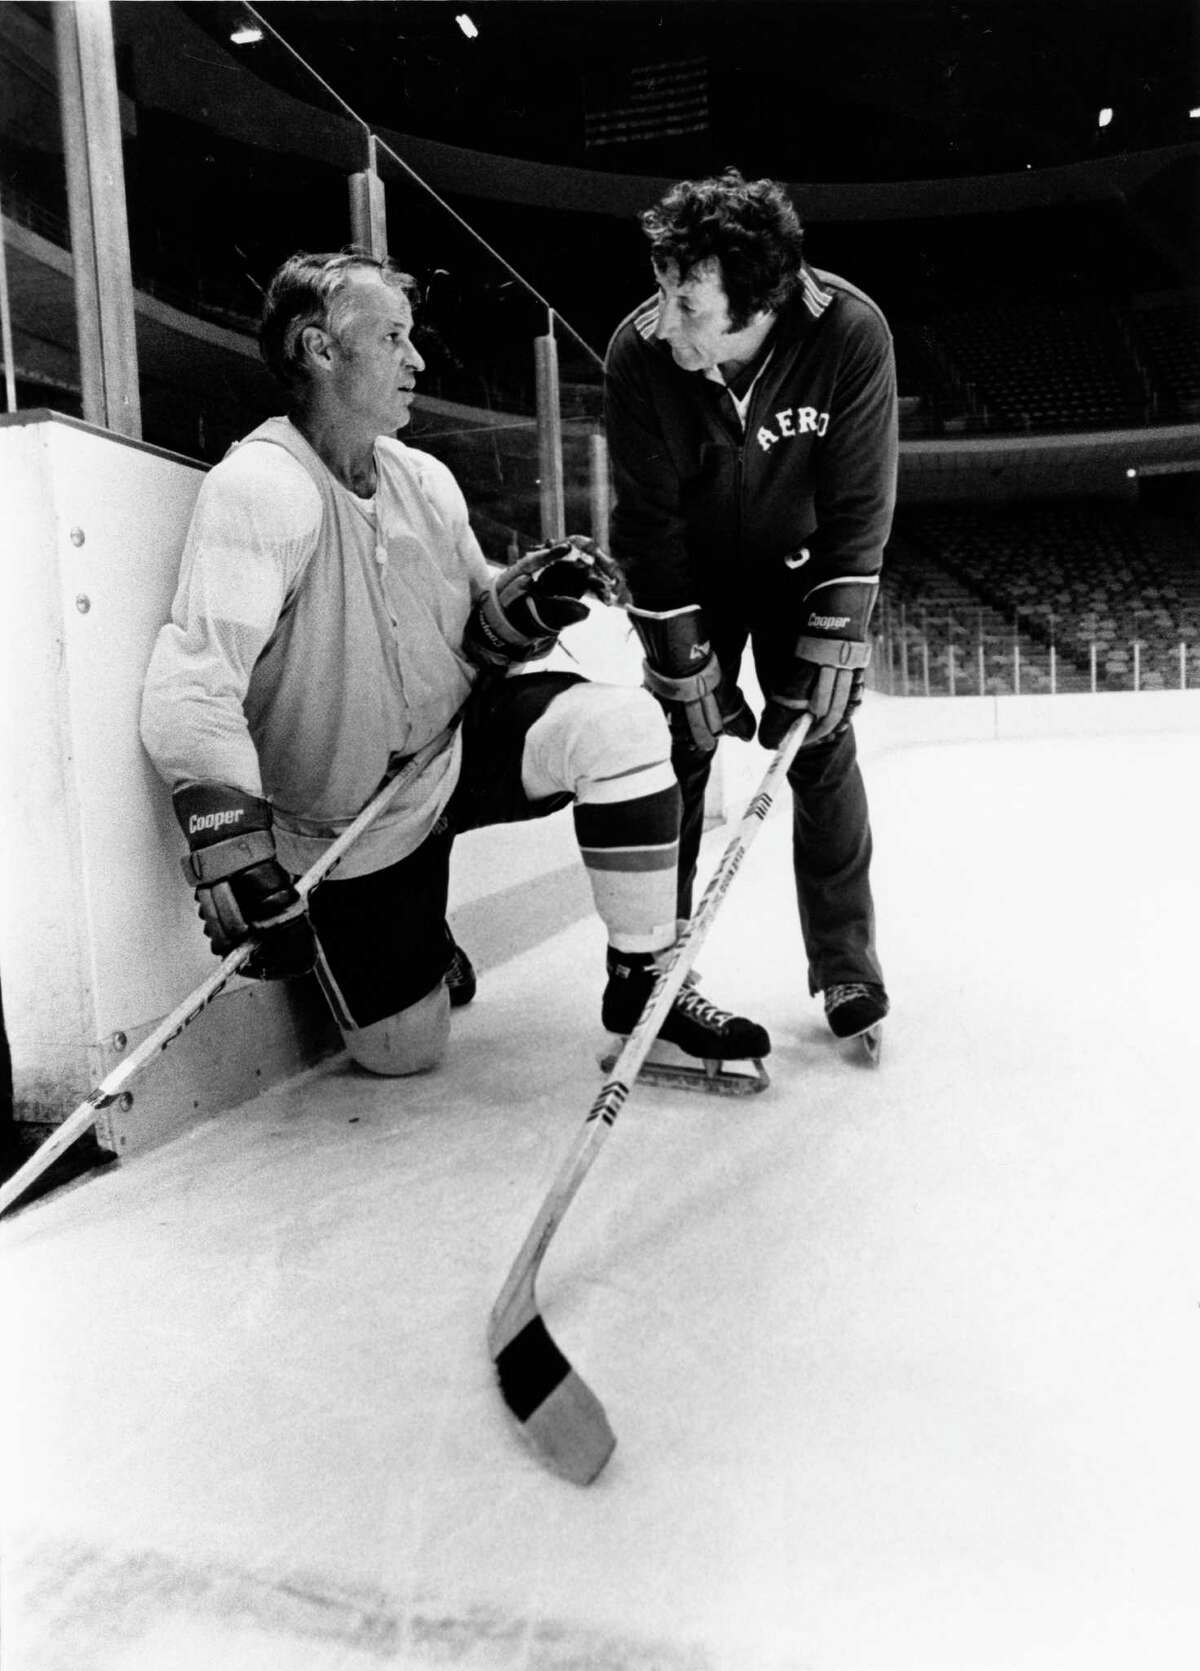 ﻿Gordie Howe, nicknamed "Mr. Hockey," and coach Bill Dineen talk ﻿at practice at The Summit in 1976.